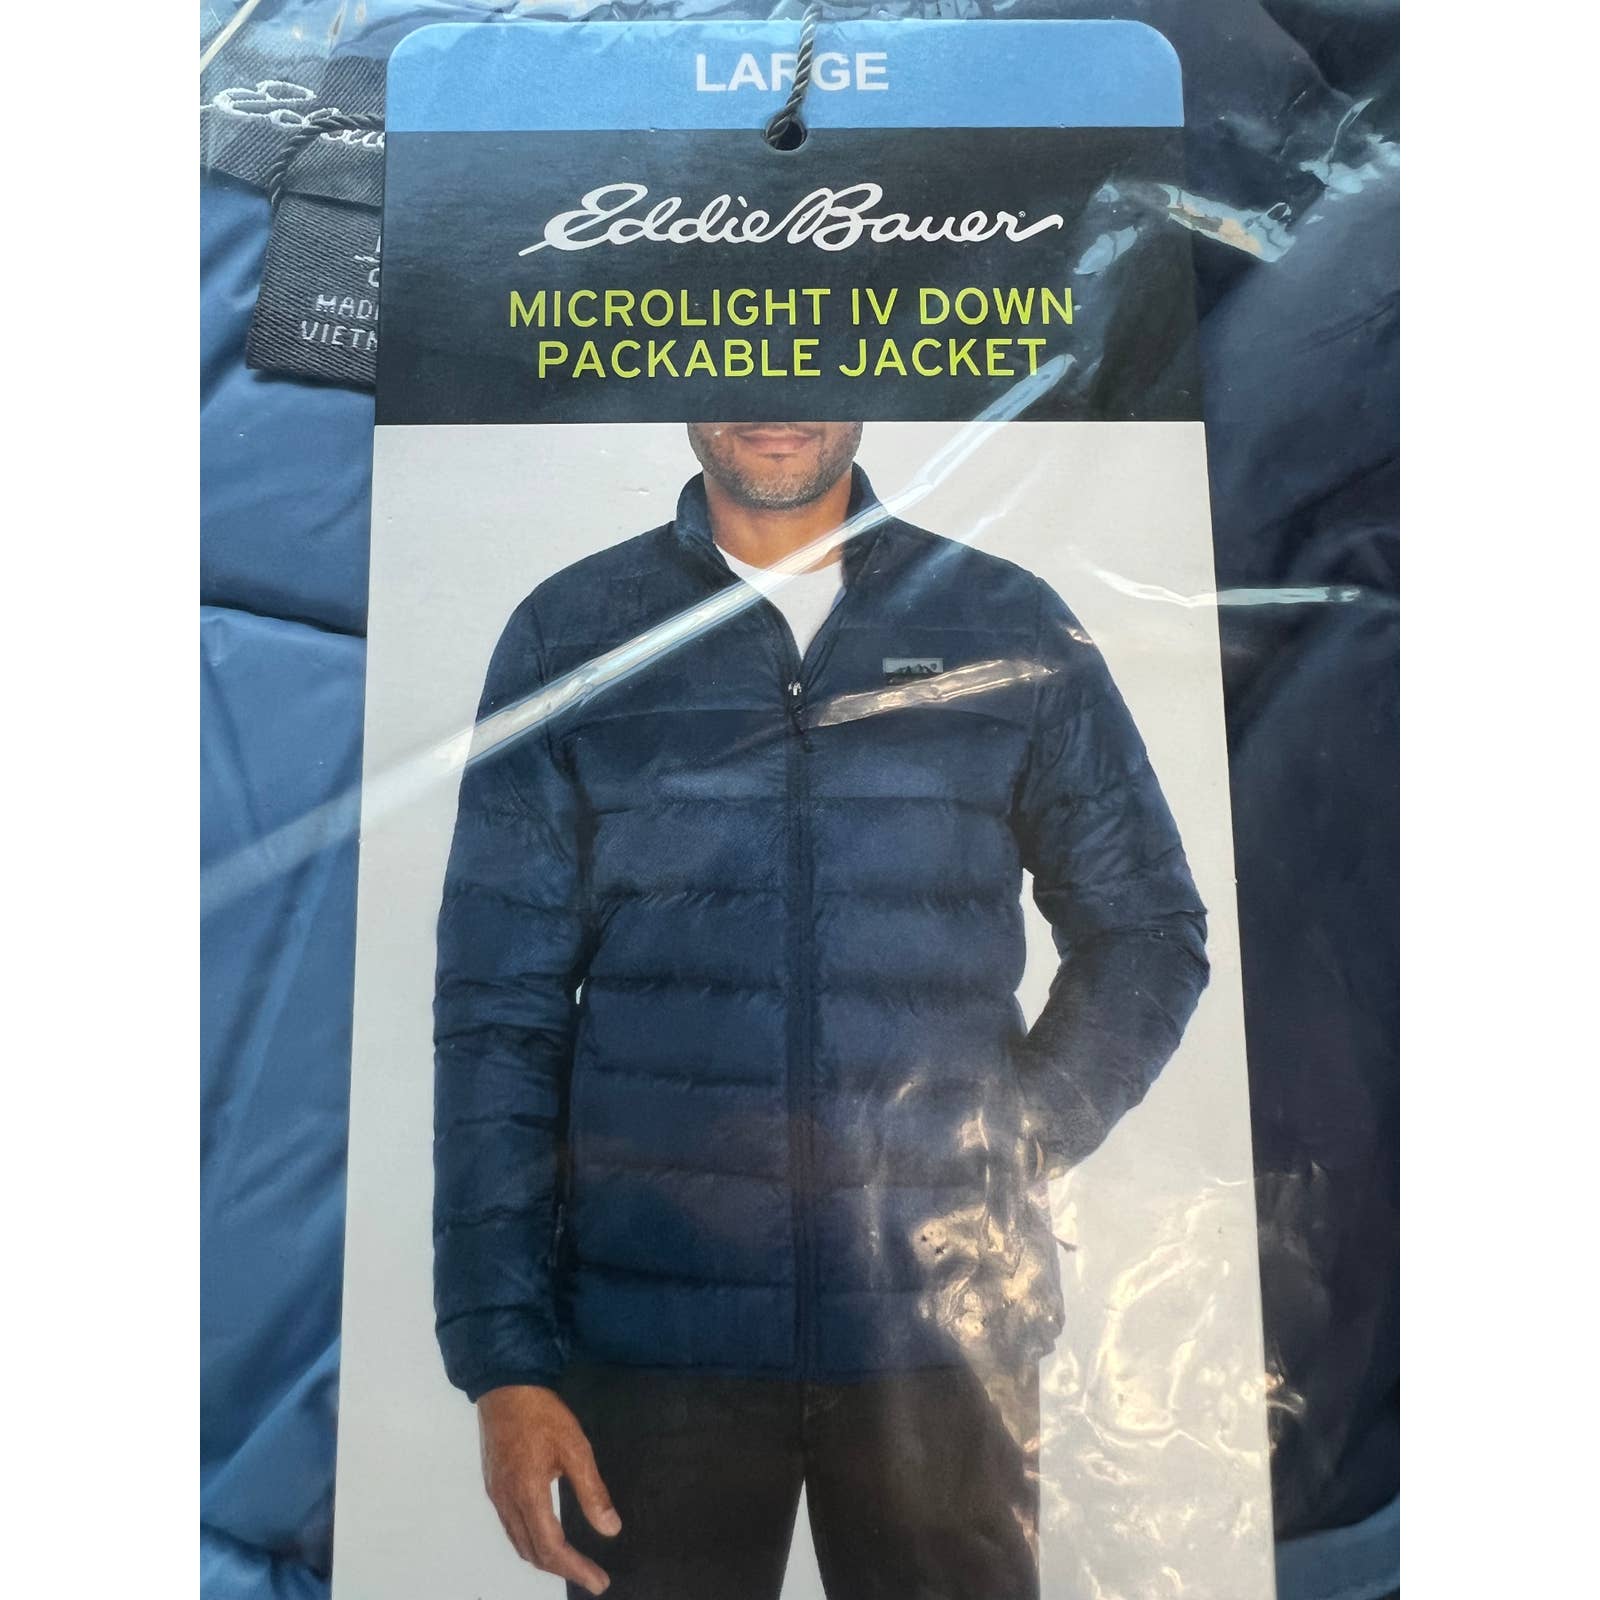 Eddie Bauer Micro Light IV Down Jacket Mens Large Packable Hooded Blue EB650